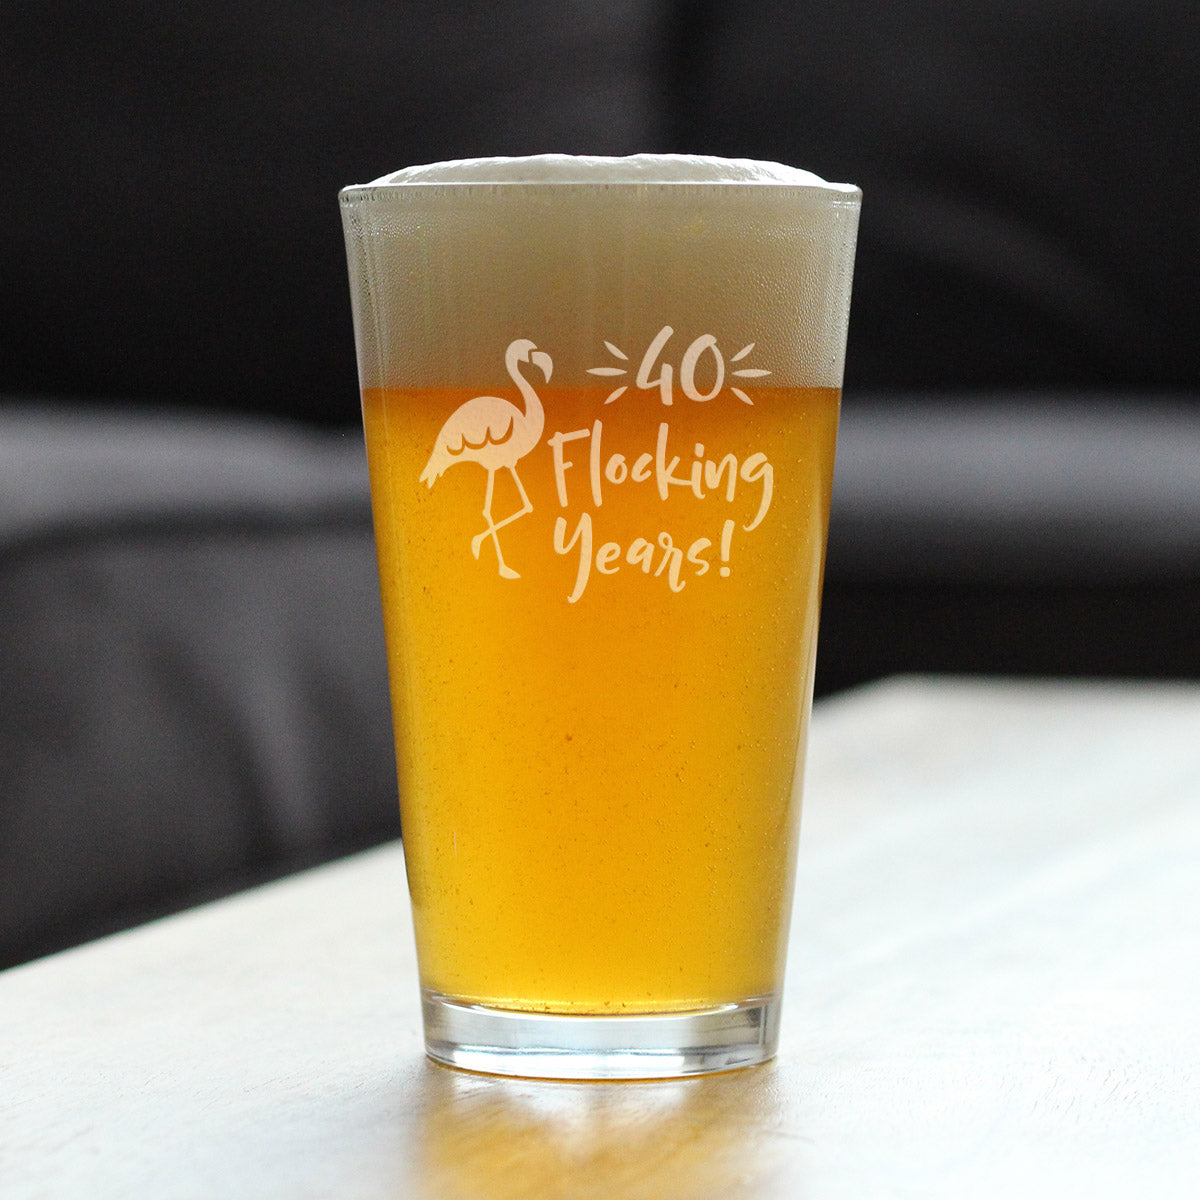 40 Flocking Years - 16 Ounce Pint Glass